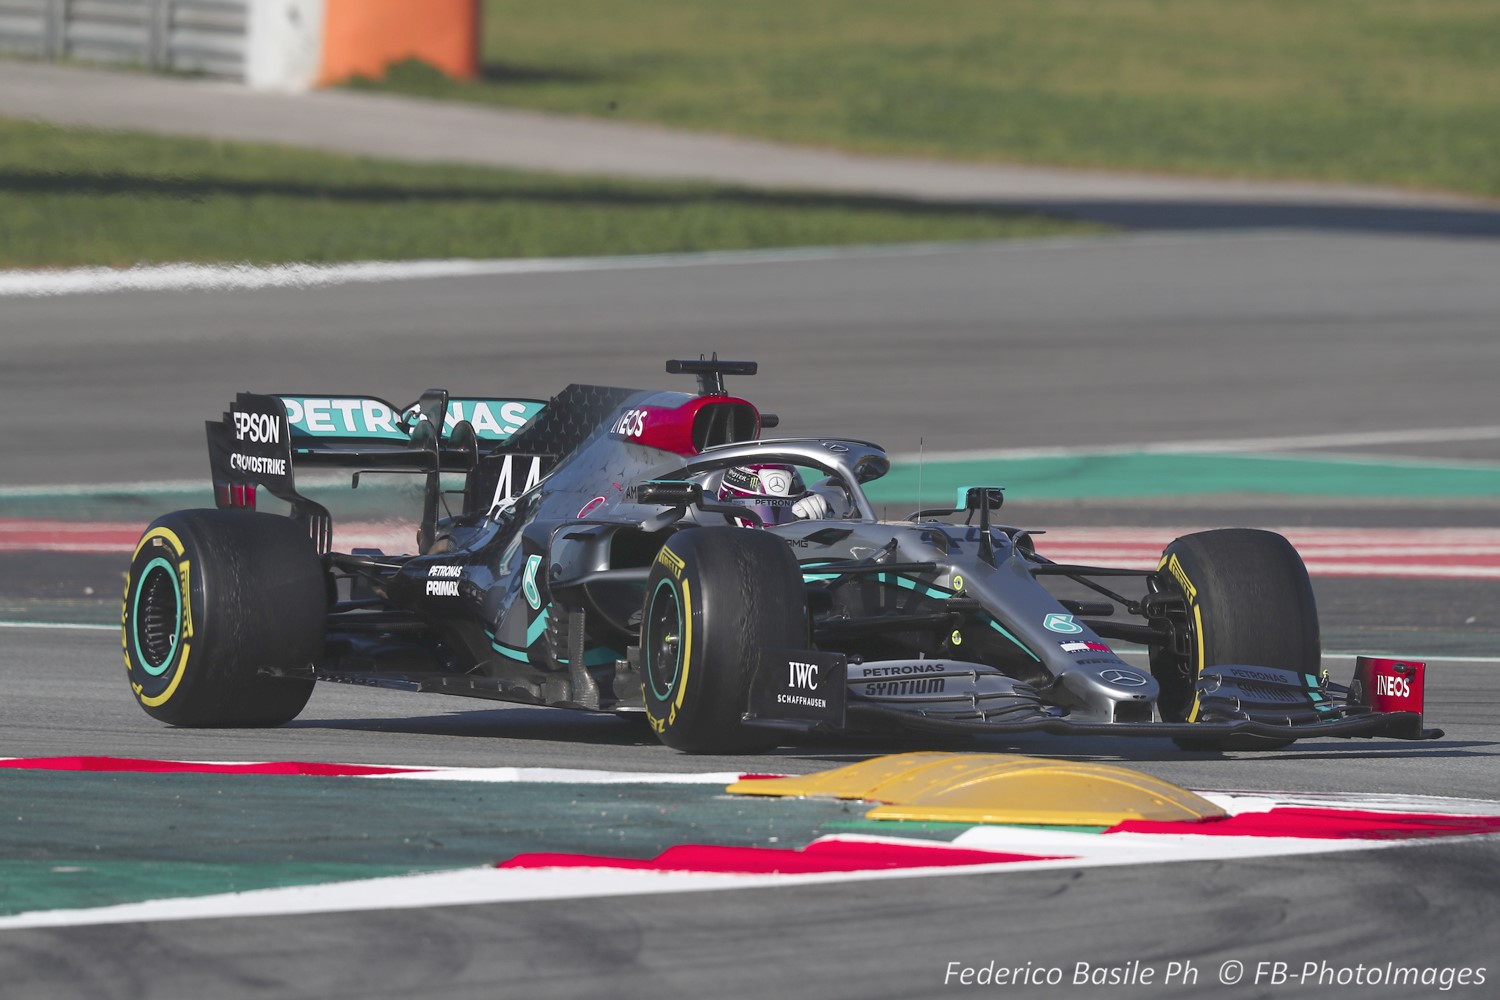 Regardless of the rules, the Mercedes car will remain superior